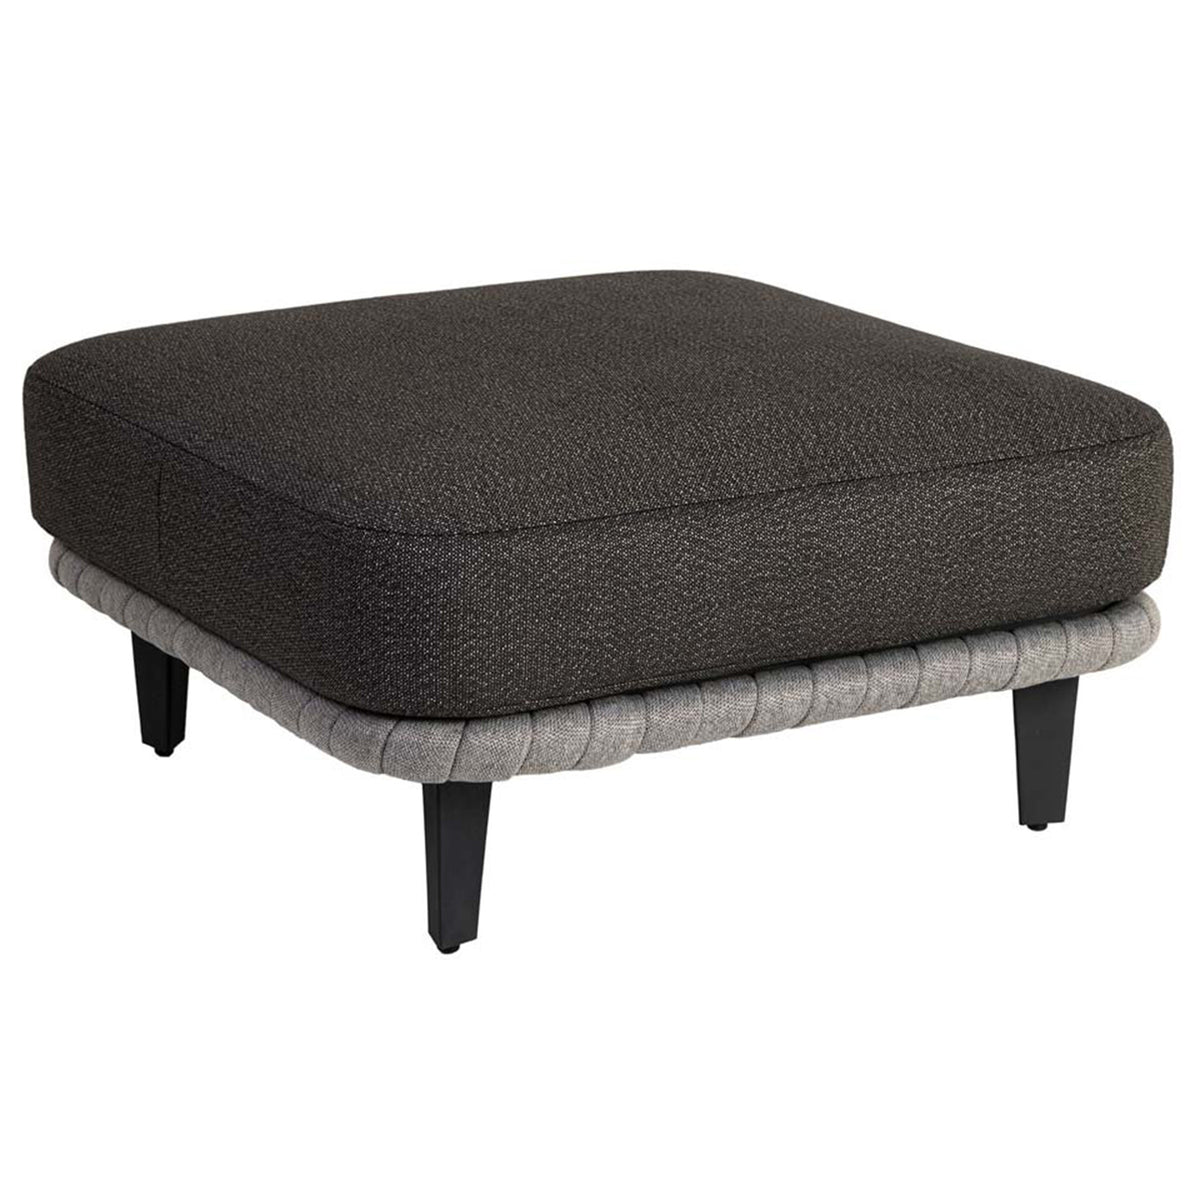 Alexander Rose Cordial Luxe Outdoor Light Grey Ottoman with Cushion